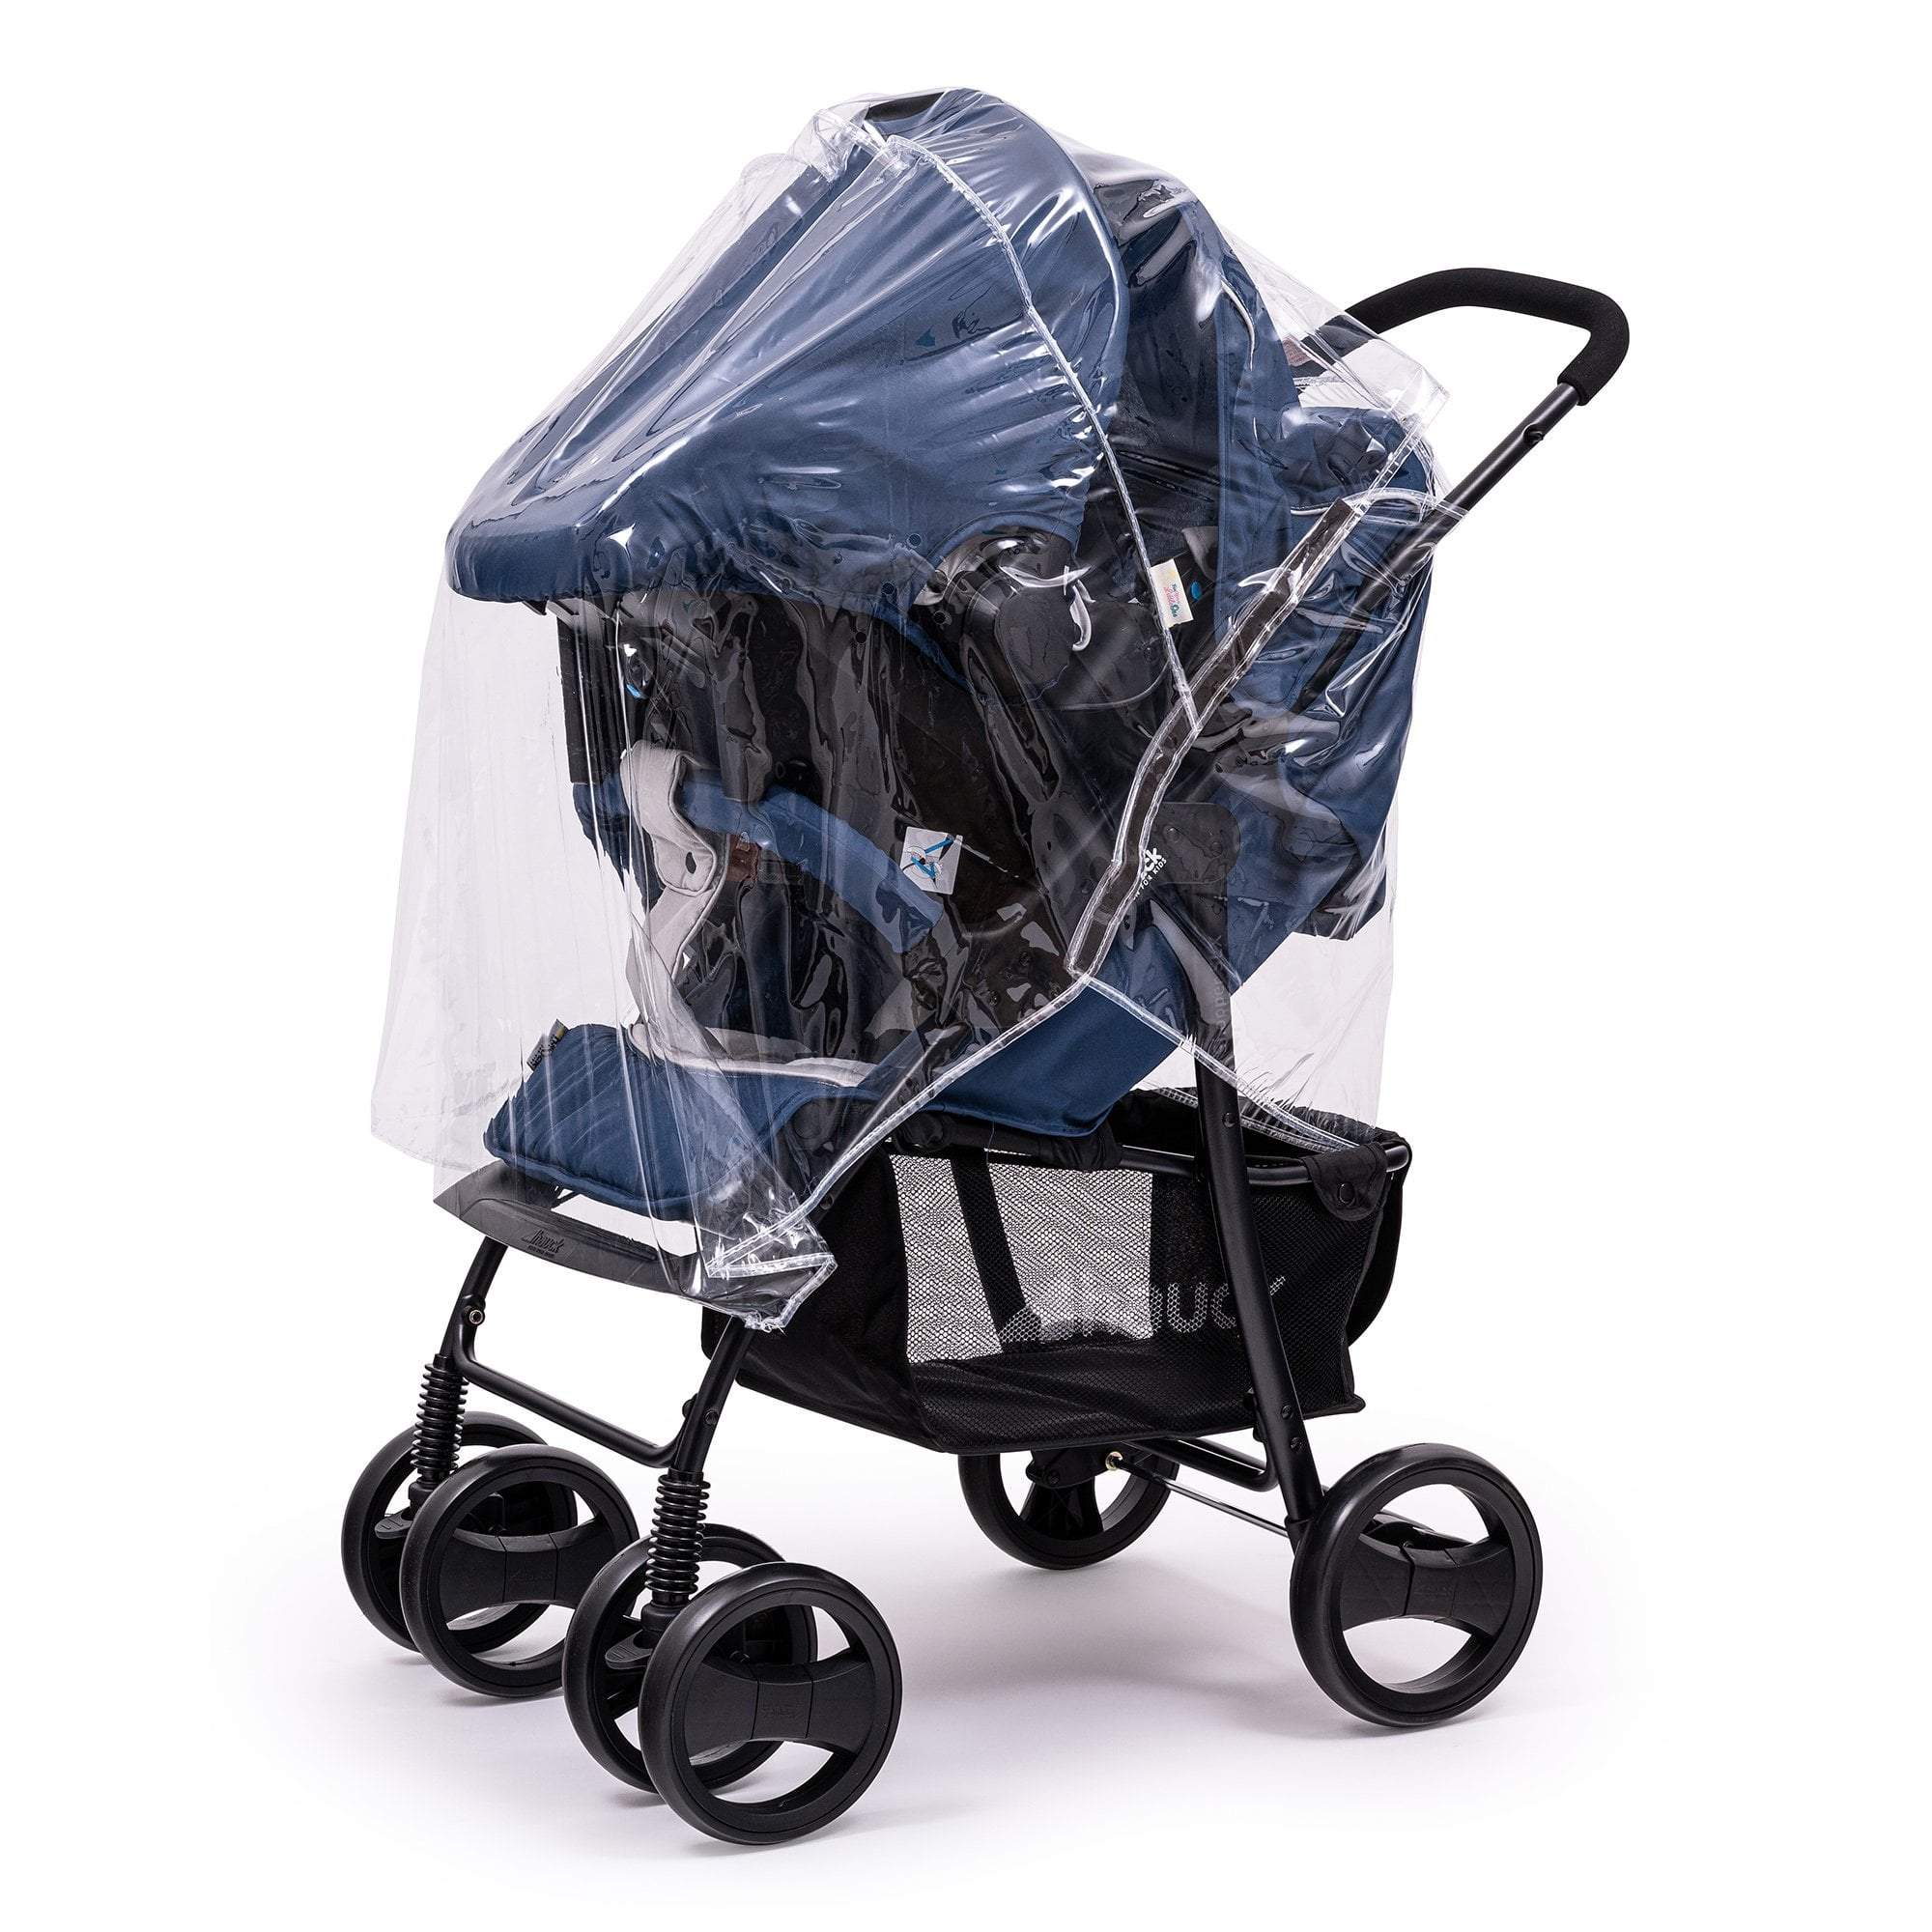 Travel System Raincover Compatible with Hauck - Fits All Models - For Your Little One